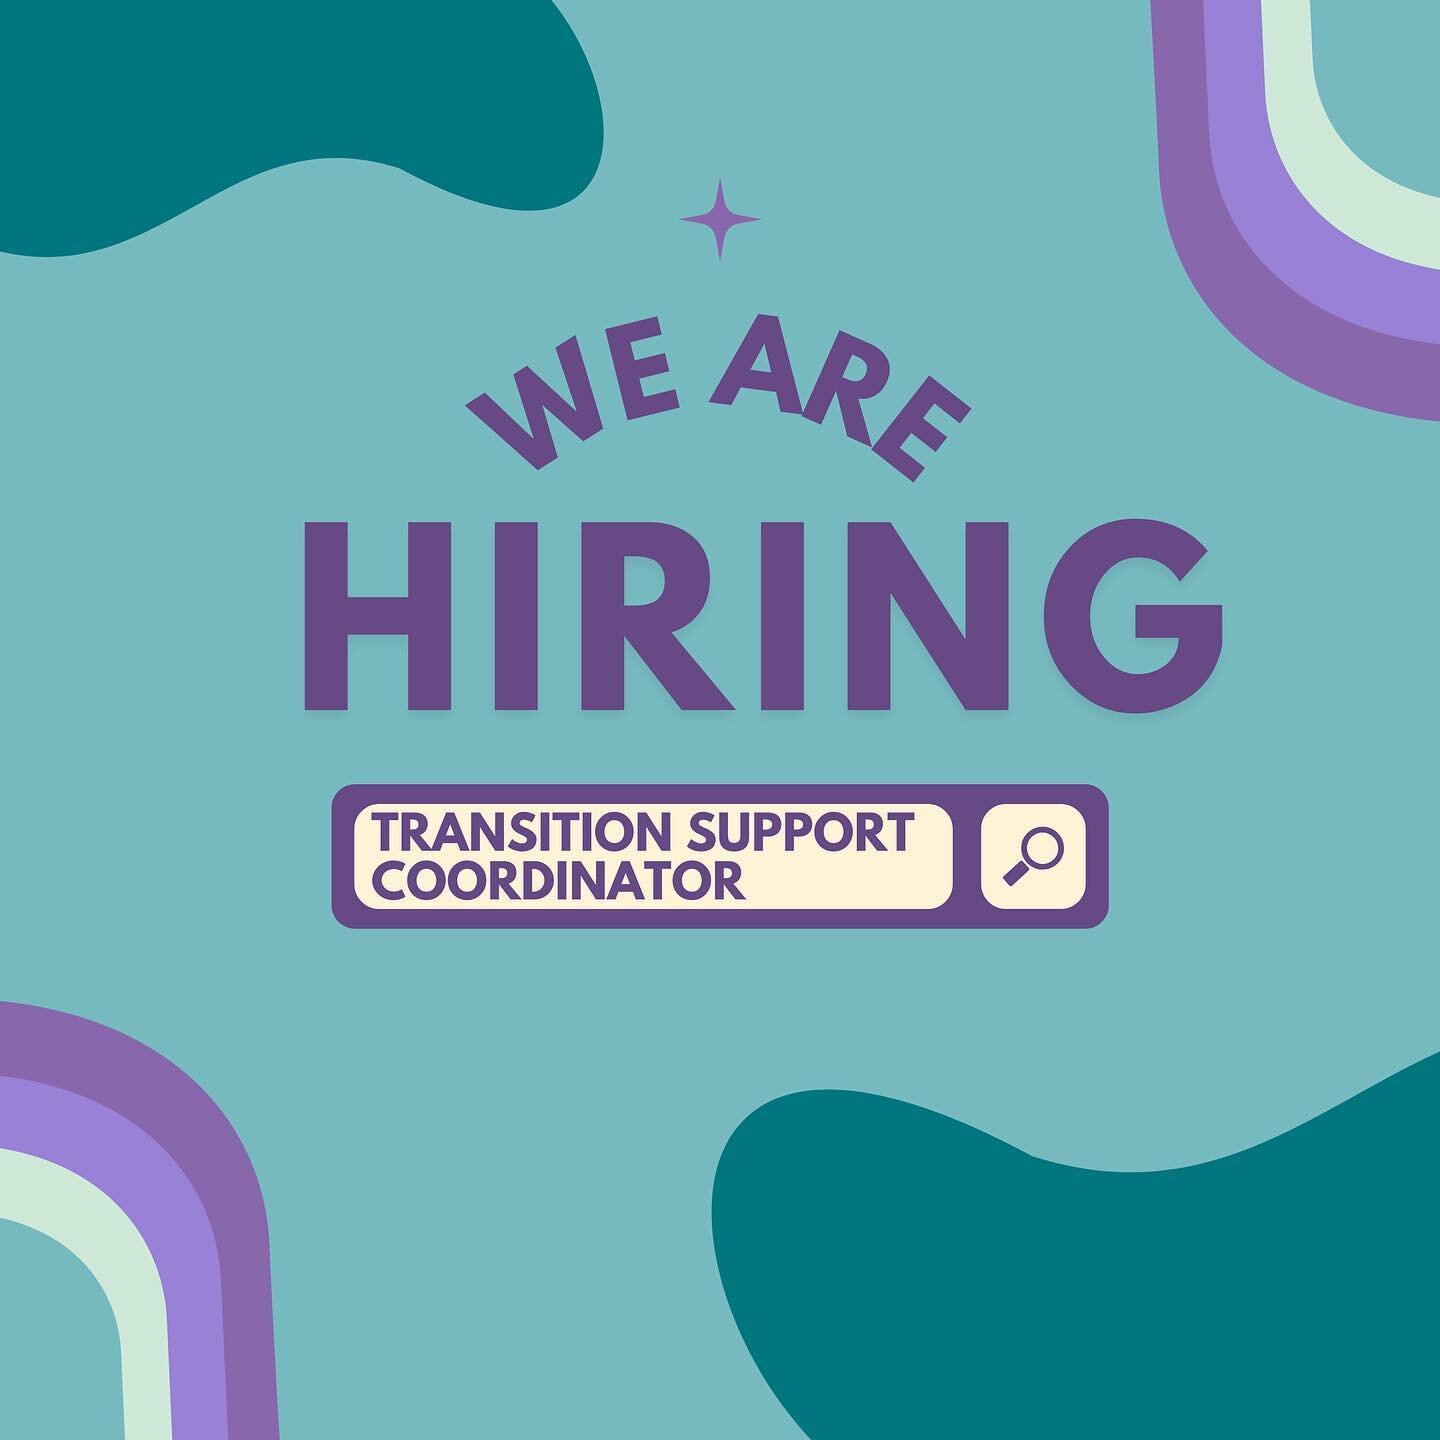 #WereHiring a Transition Support Coordinator! 

Join our team of passionate feminists making a difference for women + children in Perth County ✨ 

For more information, check out the link in our bio ➡️